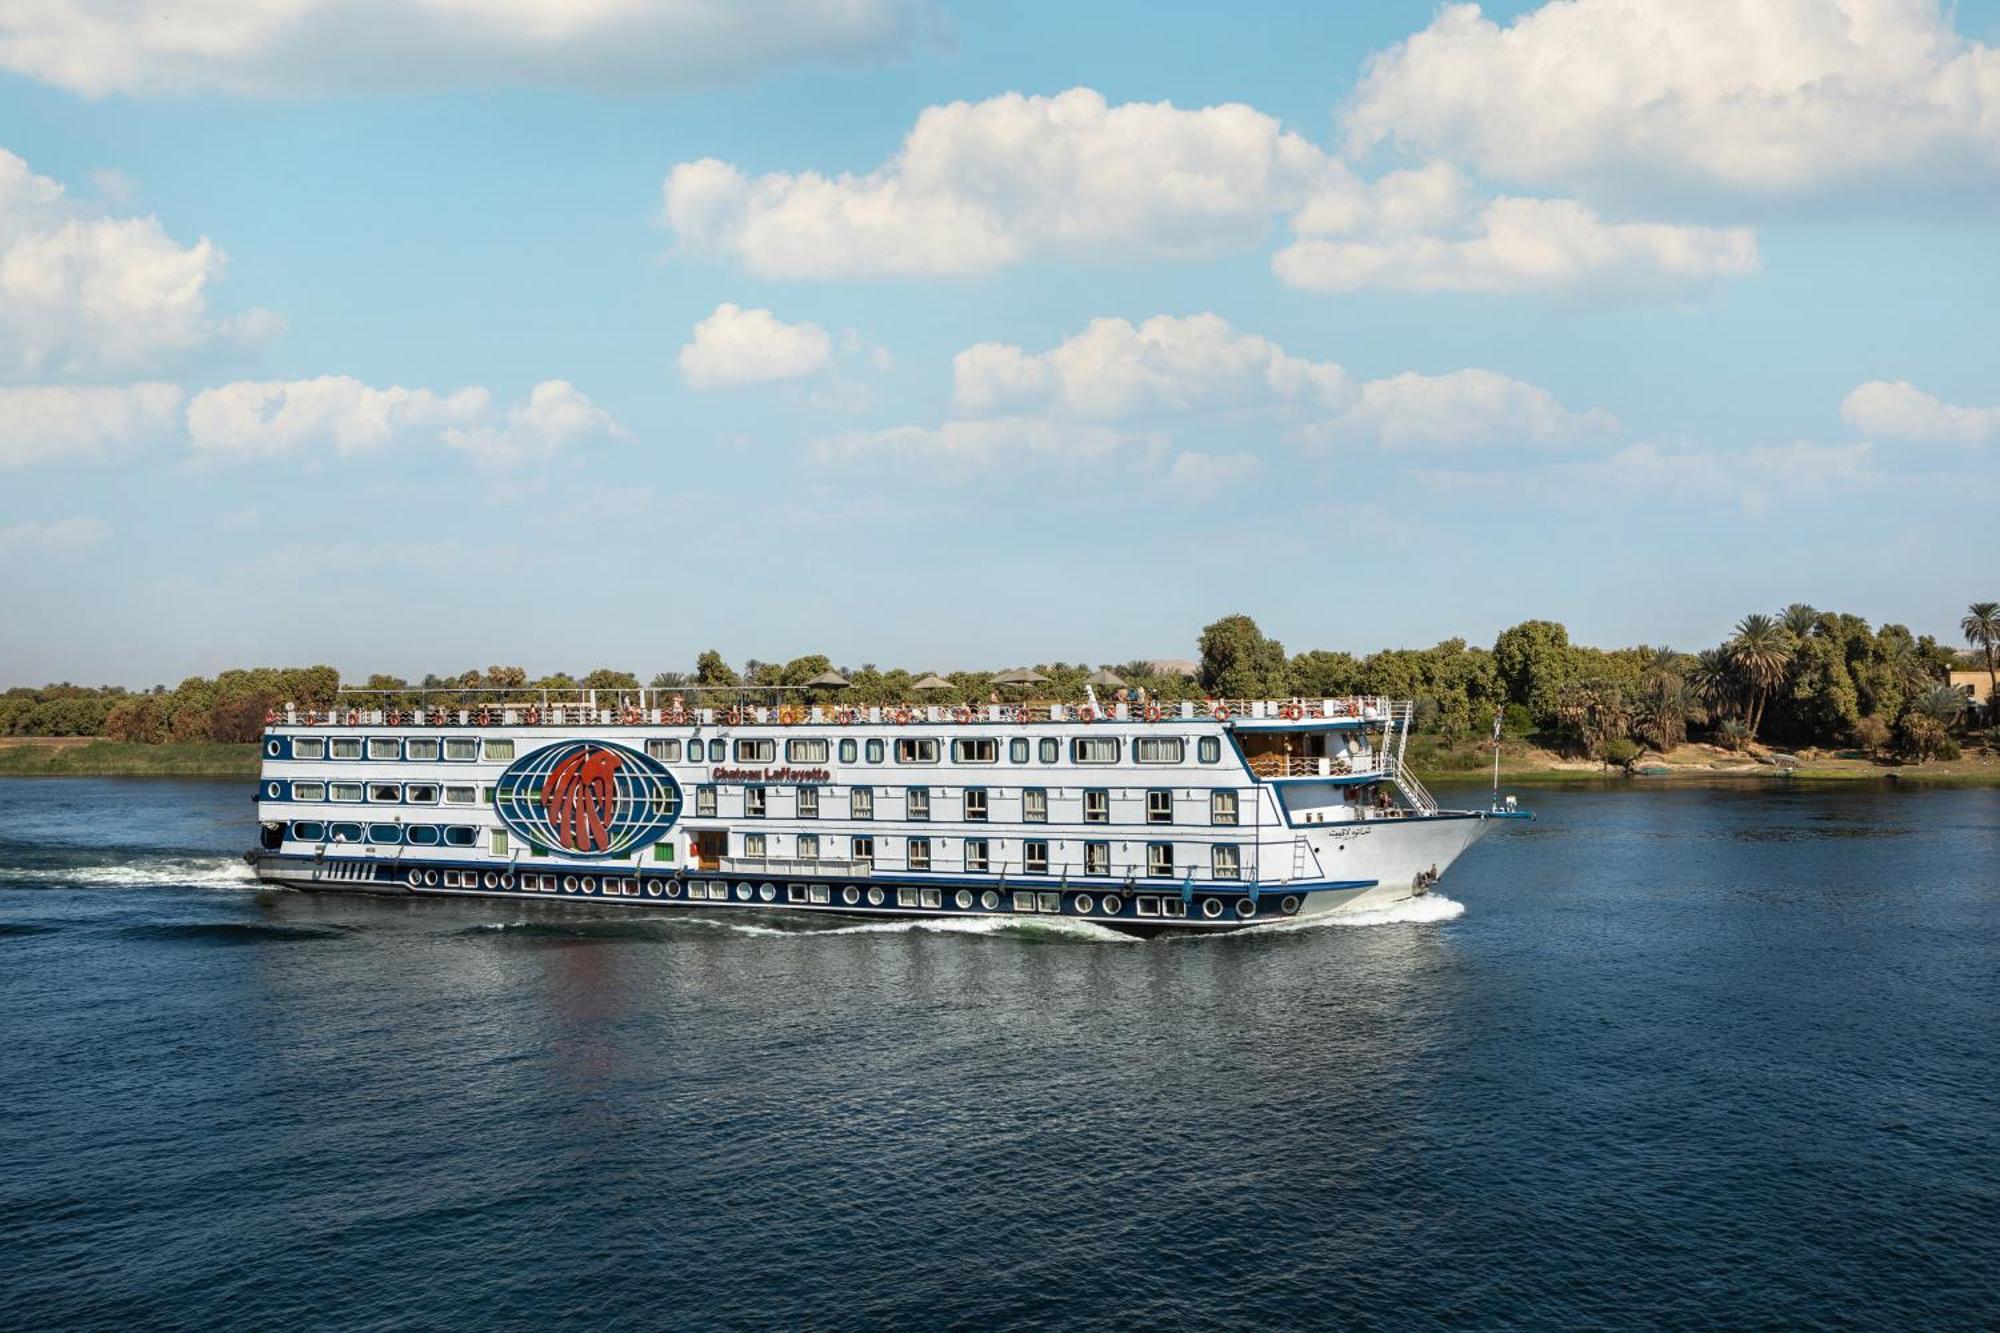 Ms Chateau Lafayette Nile Cruise - 4 Nights From Luxor Each Monday And 3 Nights From Aswan Each Friday 外观 照片